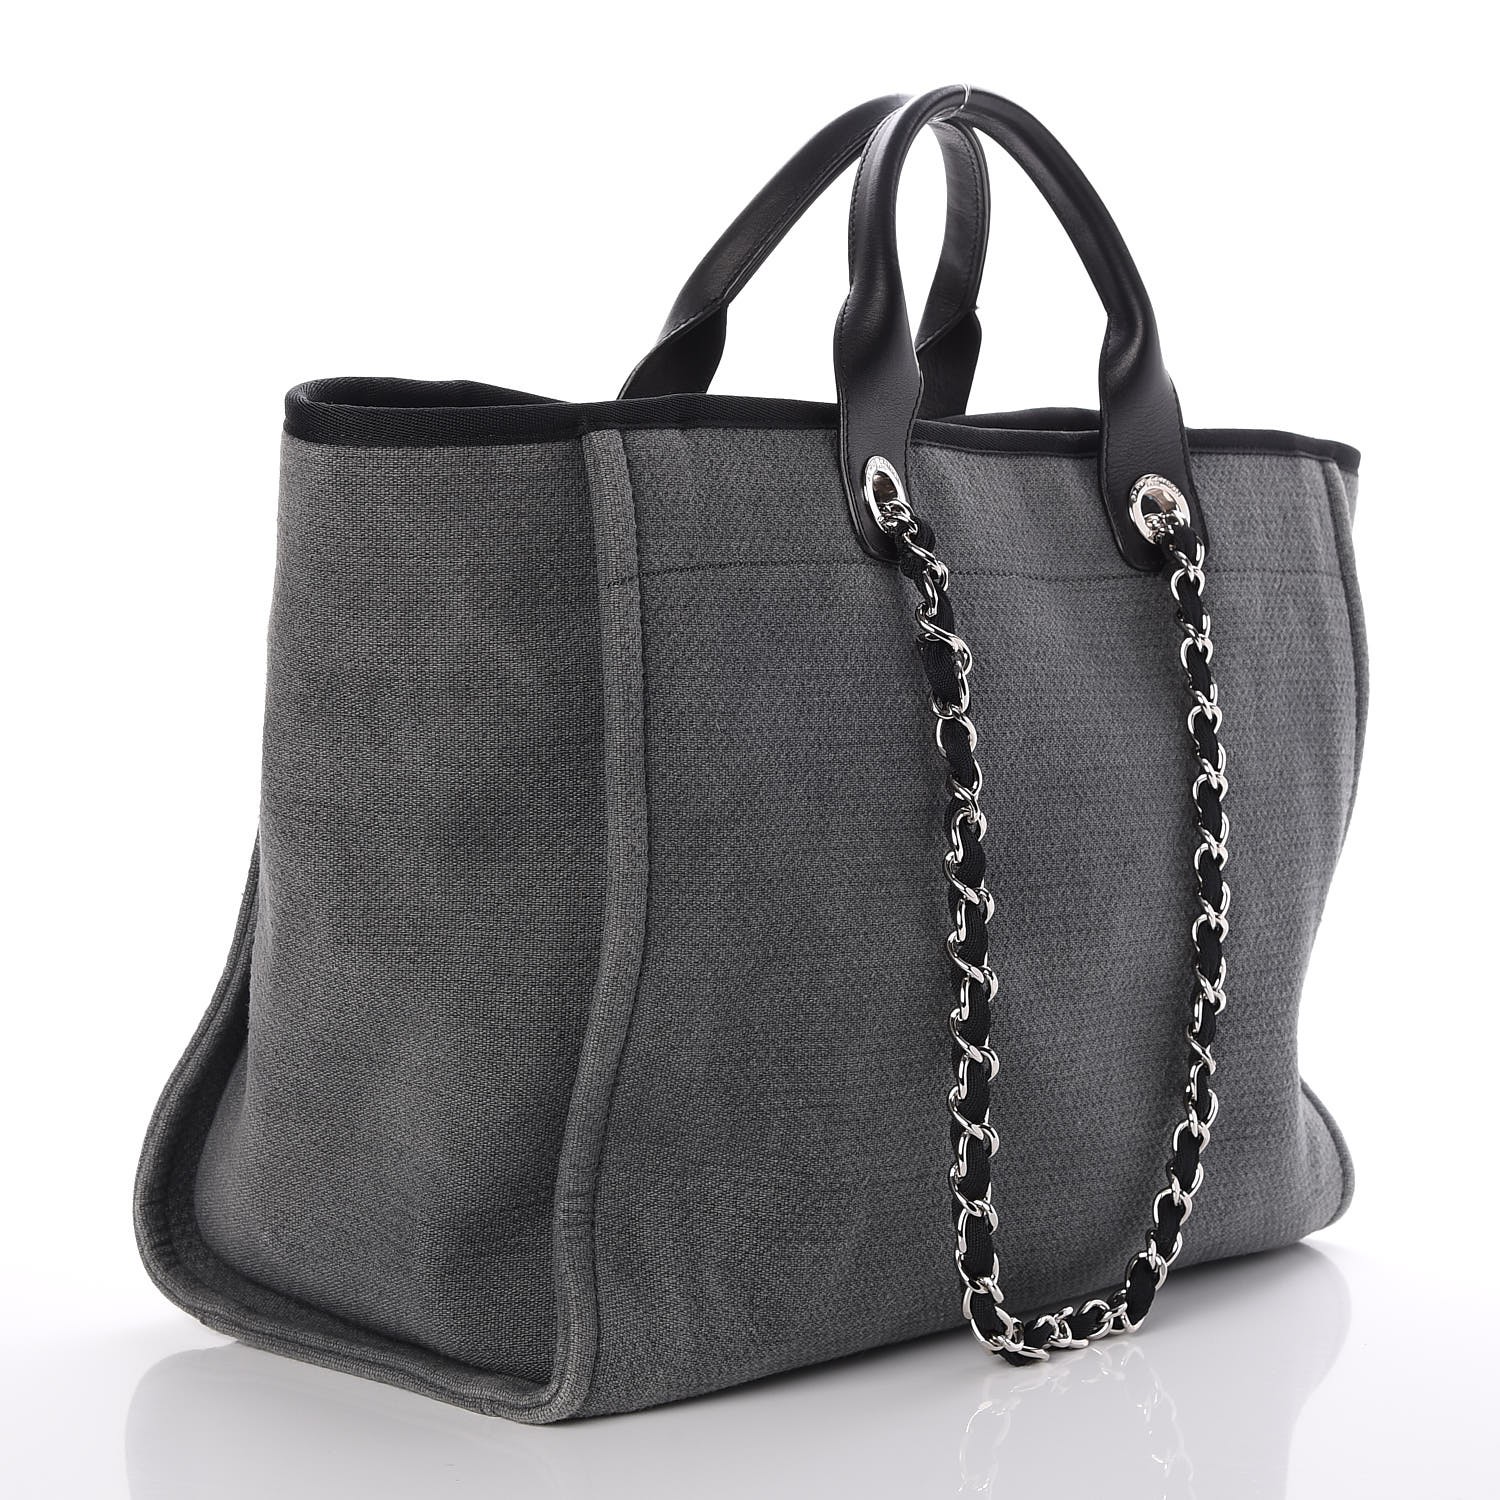 CHANEL Canvas Large Deauville Tote Grey 260905